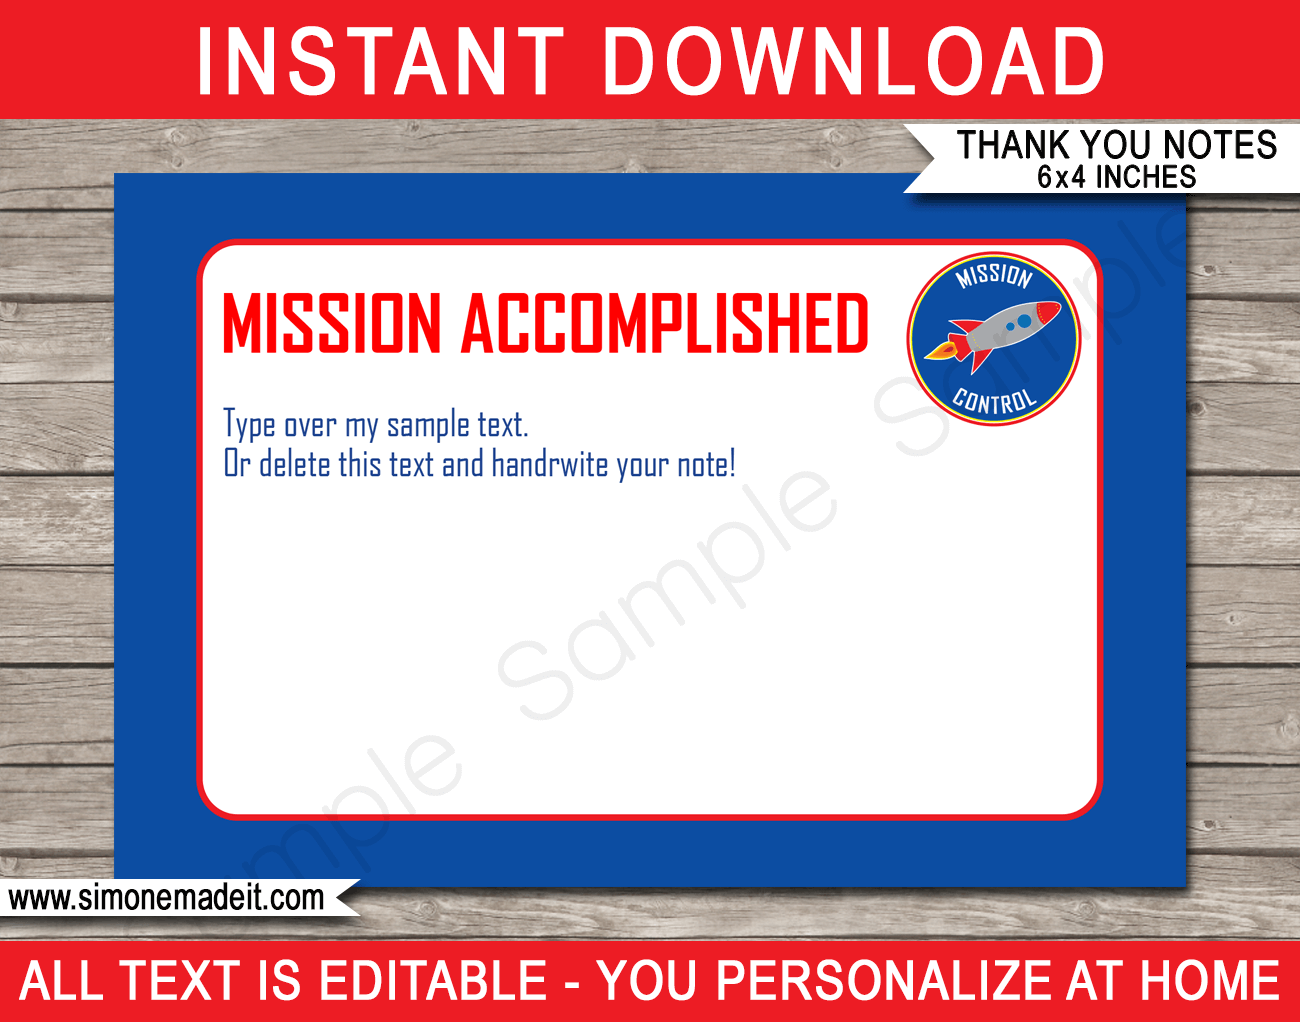 Printable Space Party Thank You Note Cards Template - Favor Tags - Space or Astronaut Birthday Party theme - Mission Control - Instant Download via simonemadeit.com